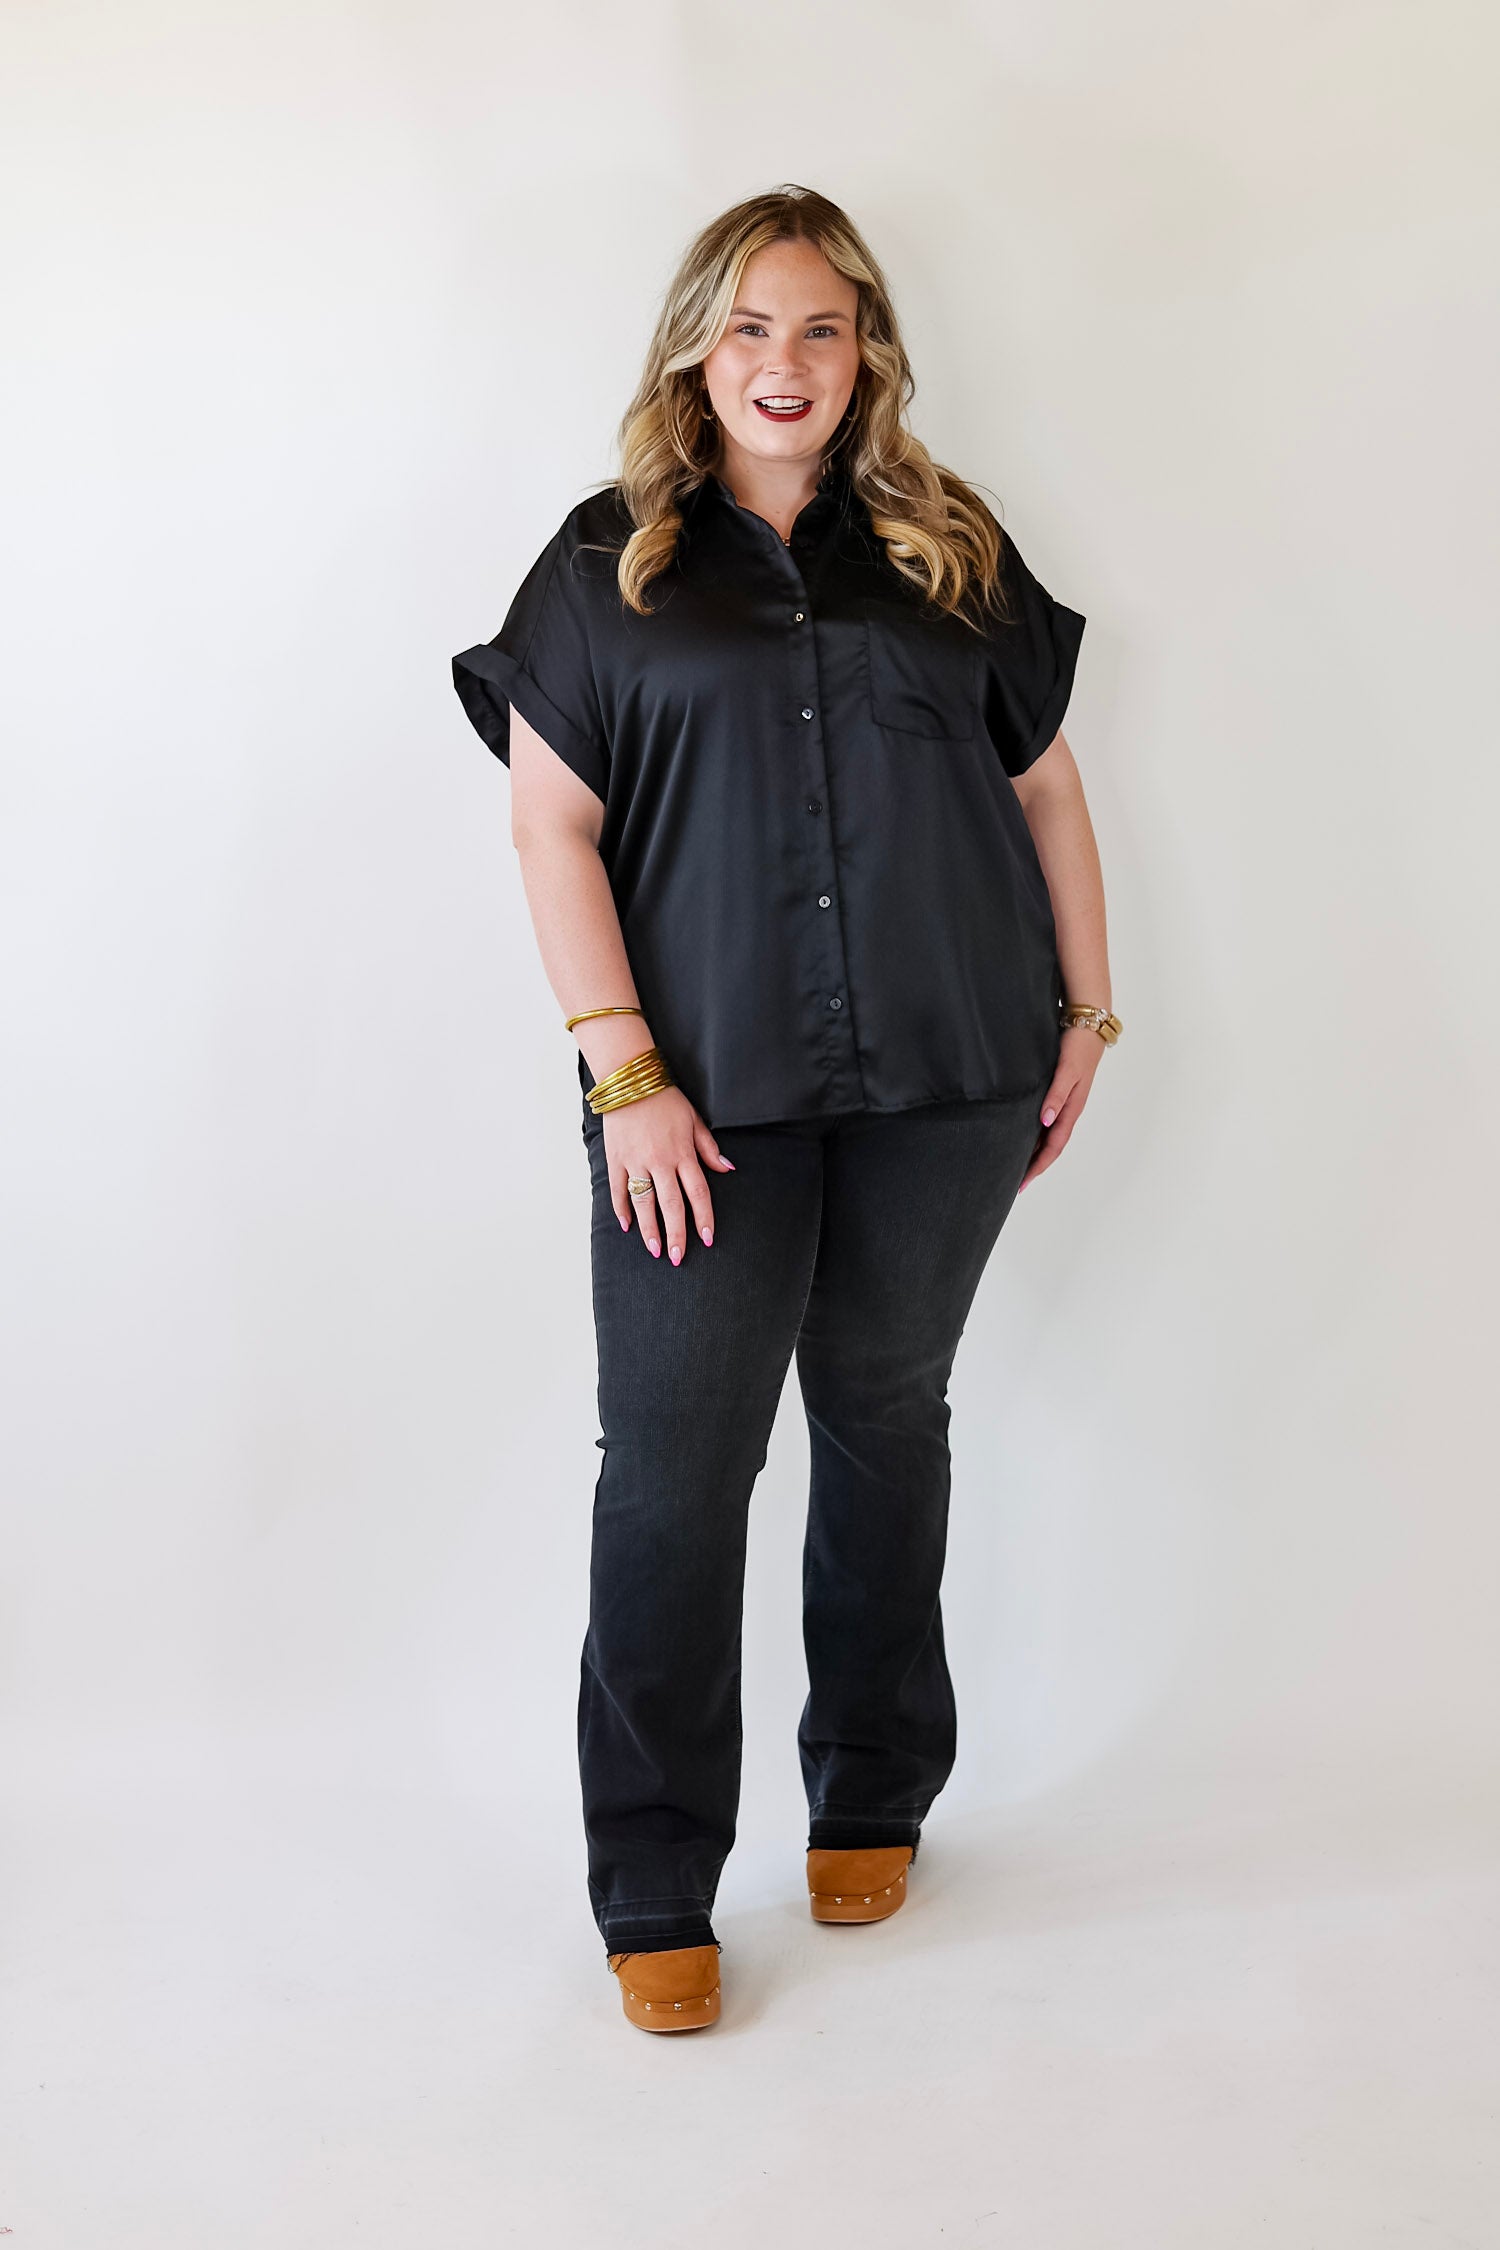 Free To Be Fab Button Up Short Sleeve Top in Black - Giddy Up Glamour Boutique